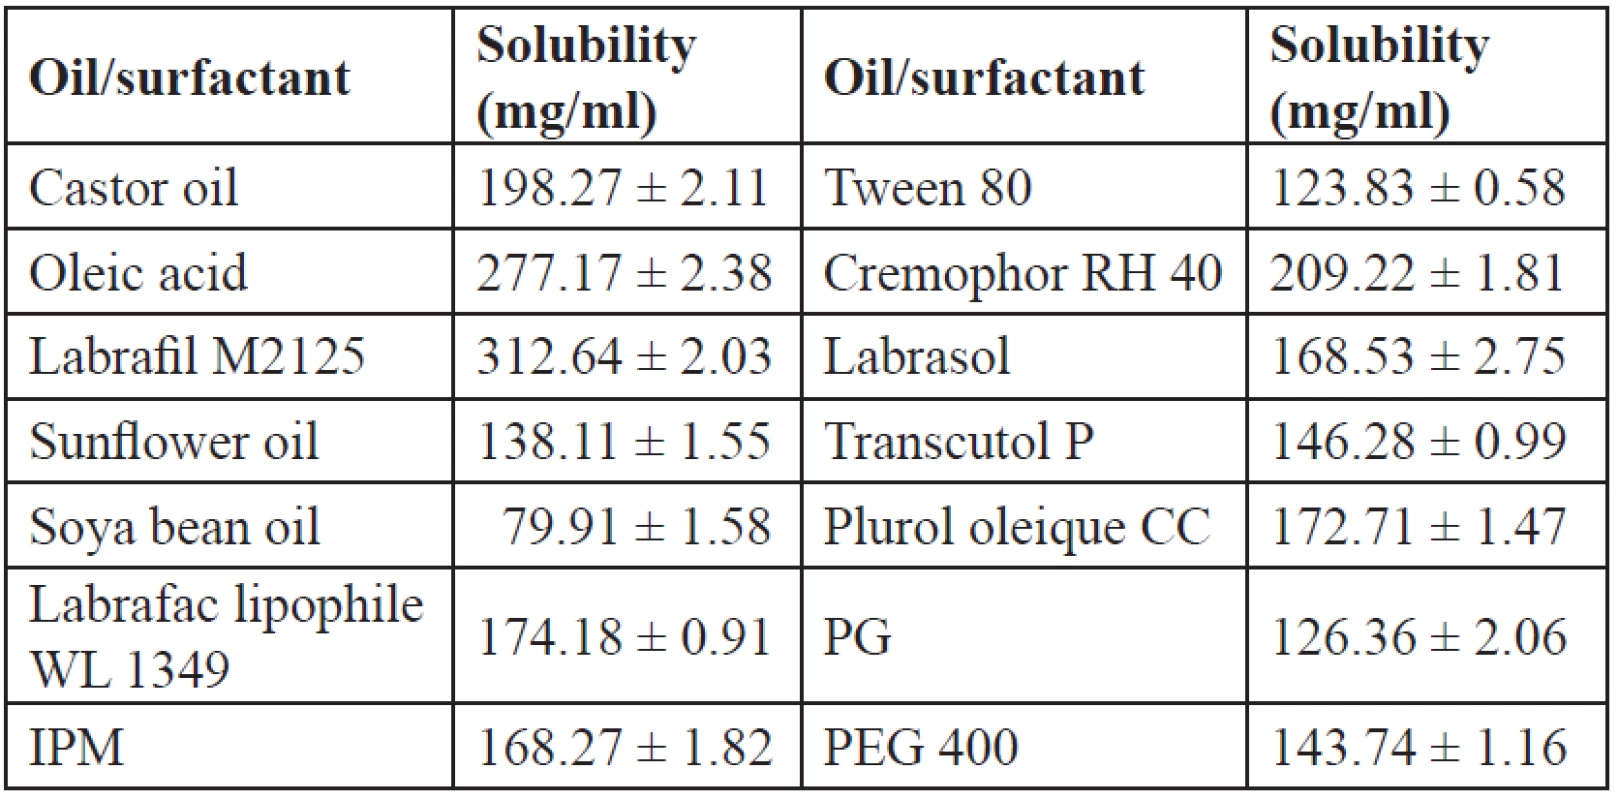 Solubility of IBN in various oils/surfactants